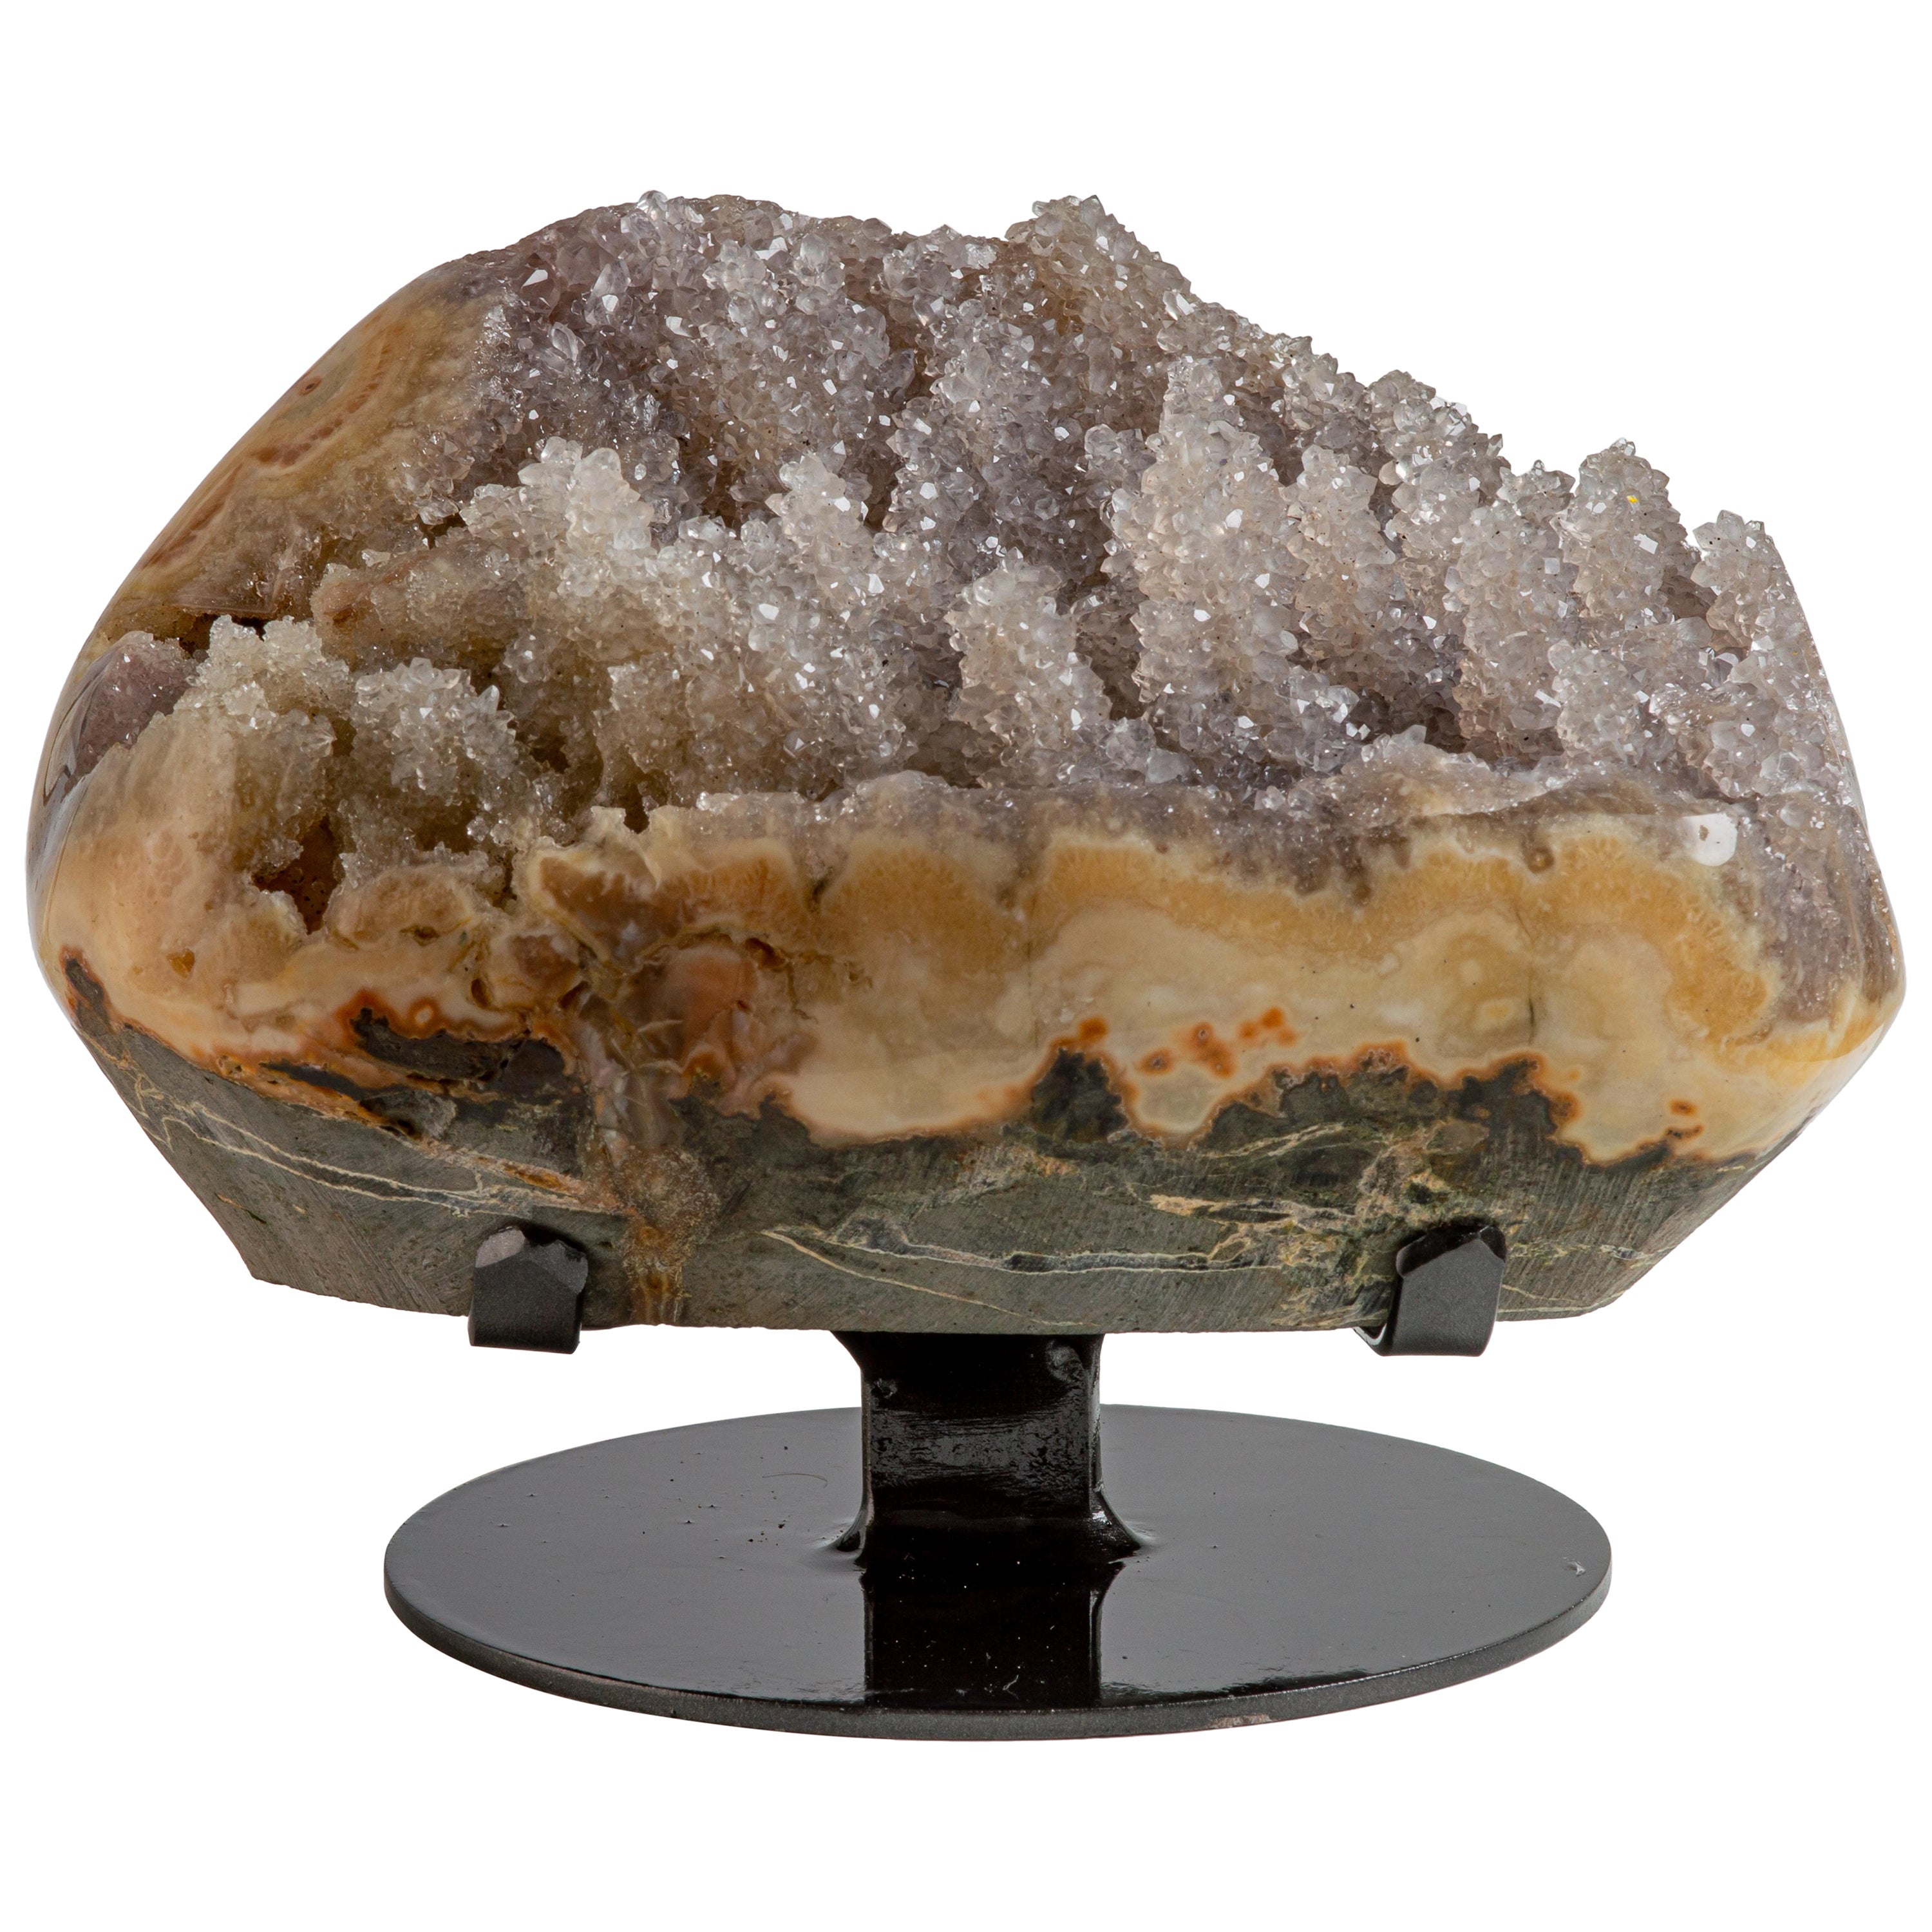 Small Formation of Clear Quartz on Thick Agate